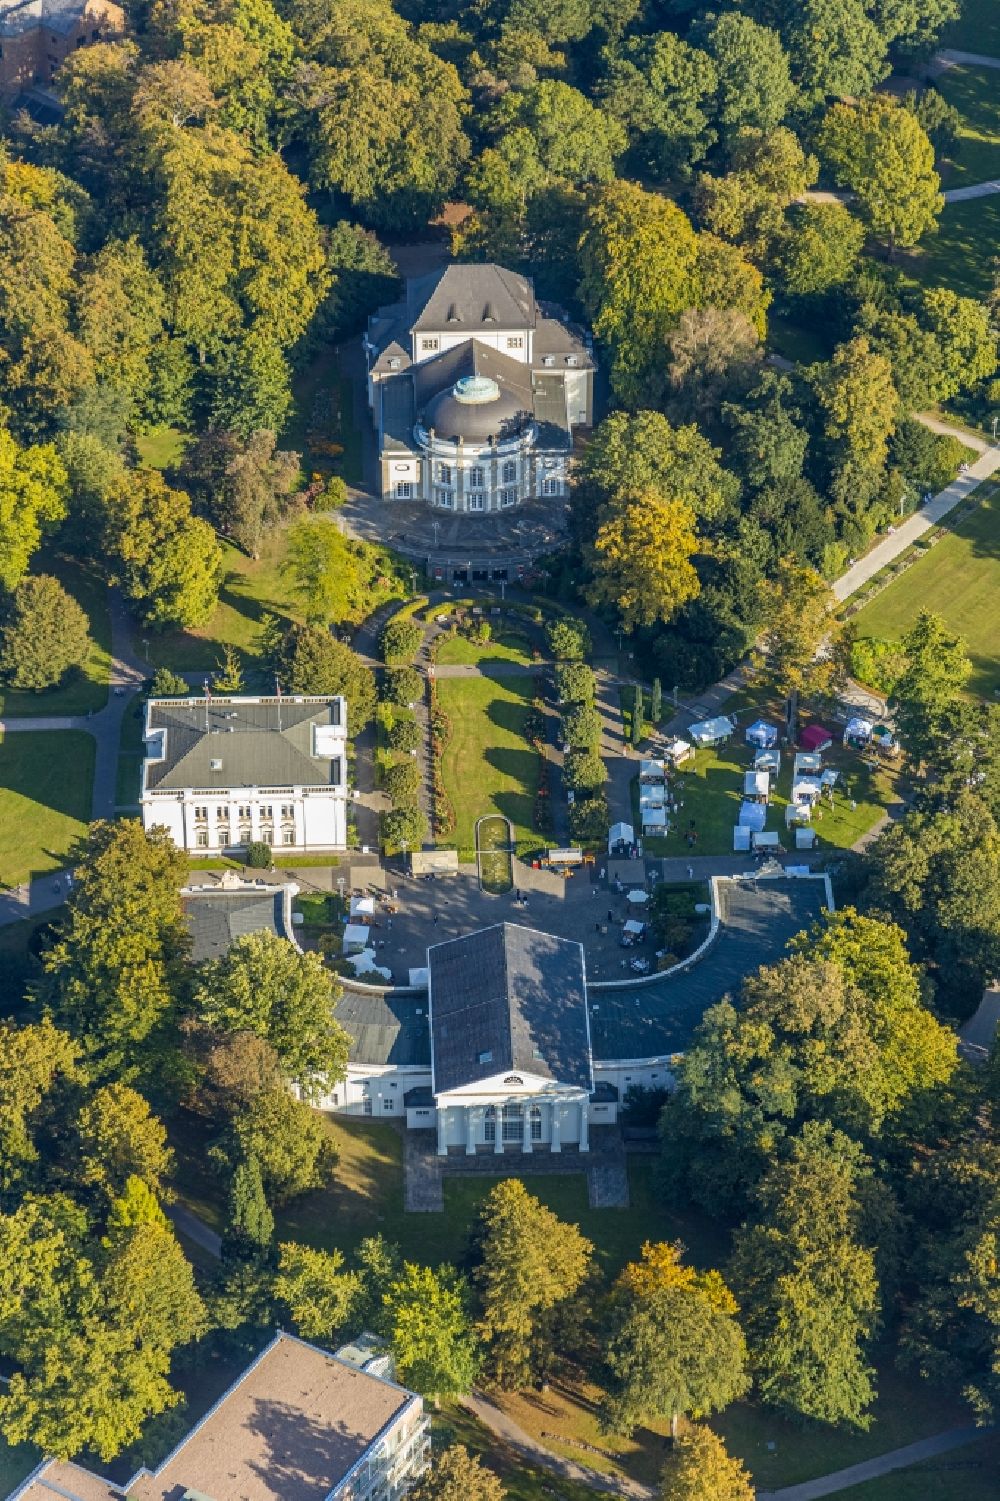 Bad Oeynhausen from the bird's eye view: Building of the Spa and Event house and park of the Staatsbad Bad Oeynhausen with theater and clinic buildings in the district Gohfeld in Bad Oeynhausen in the state North Rhine-Westphalia, Germany